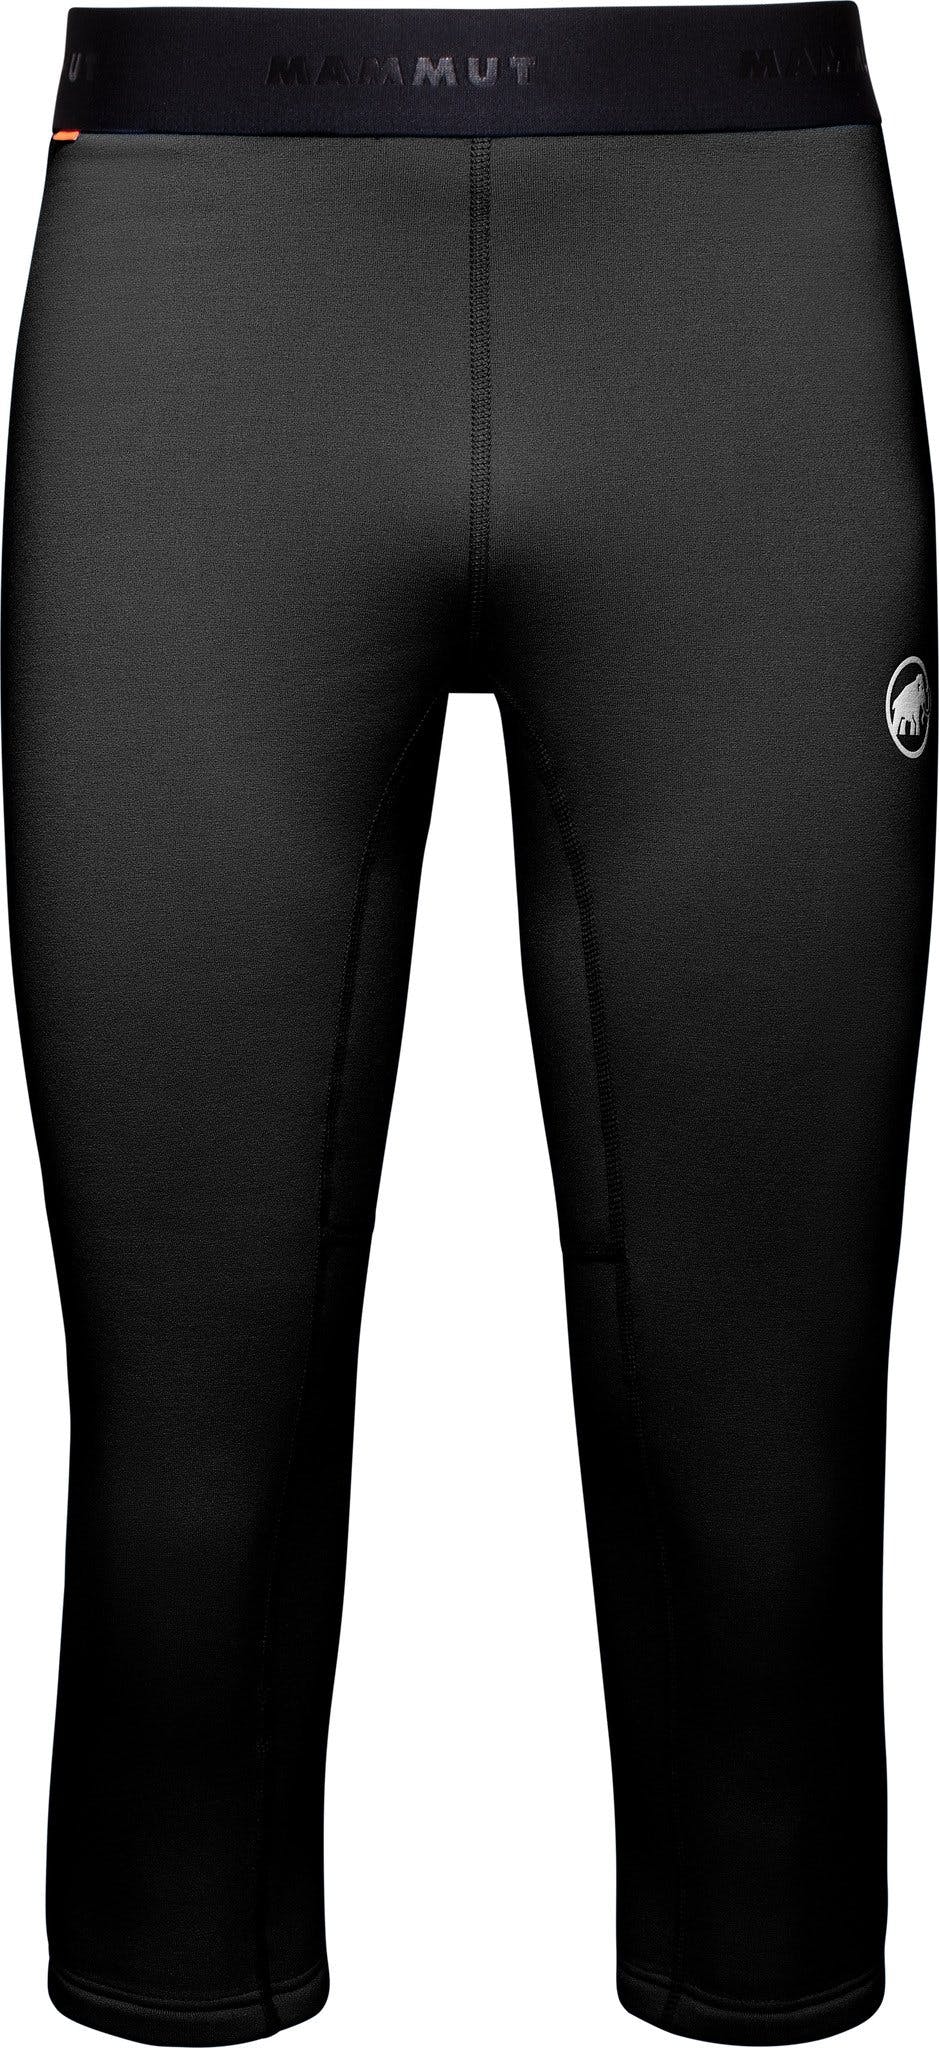 Product image for Aconcagua Midlayer 3/4 Tights - Men's